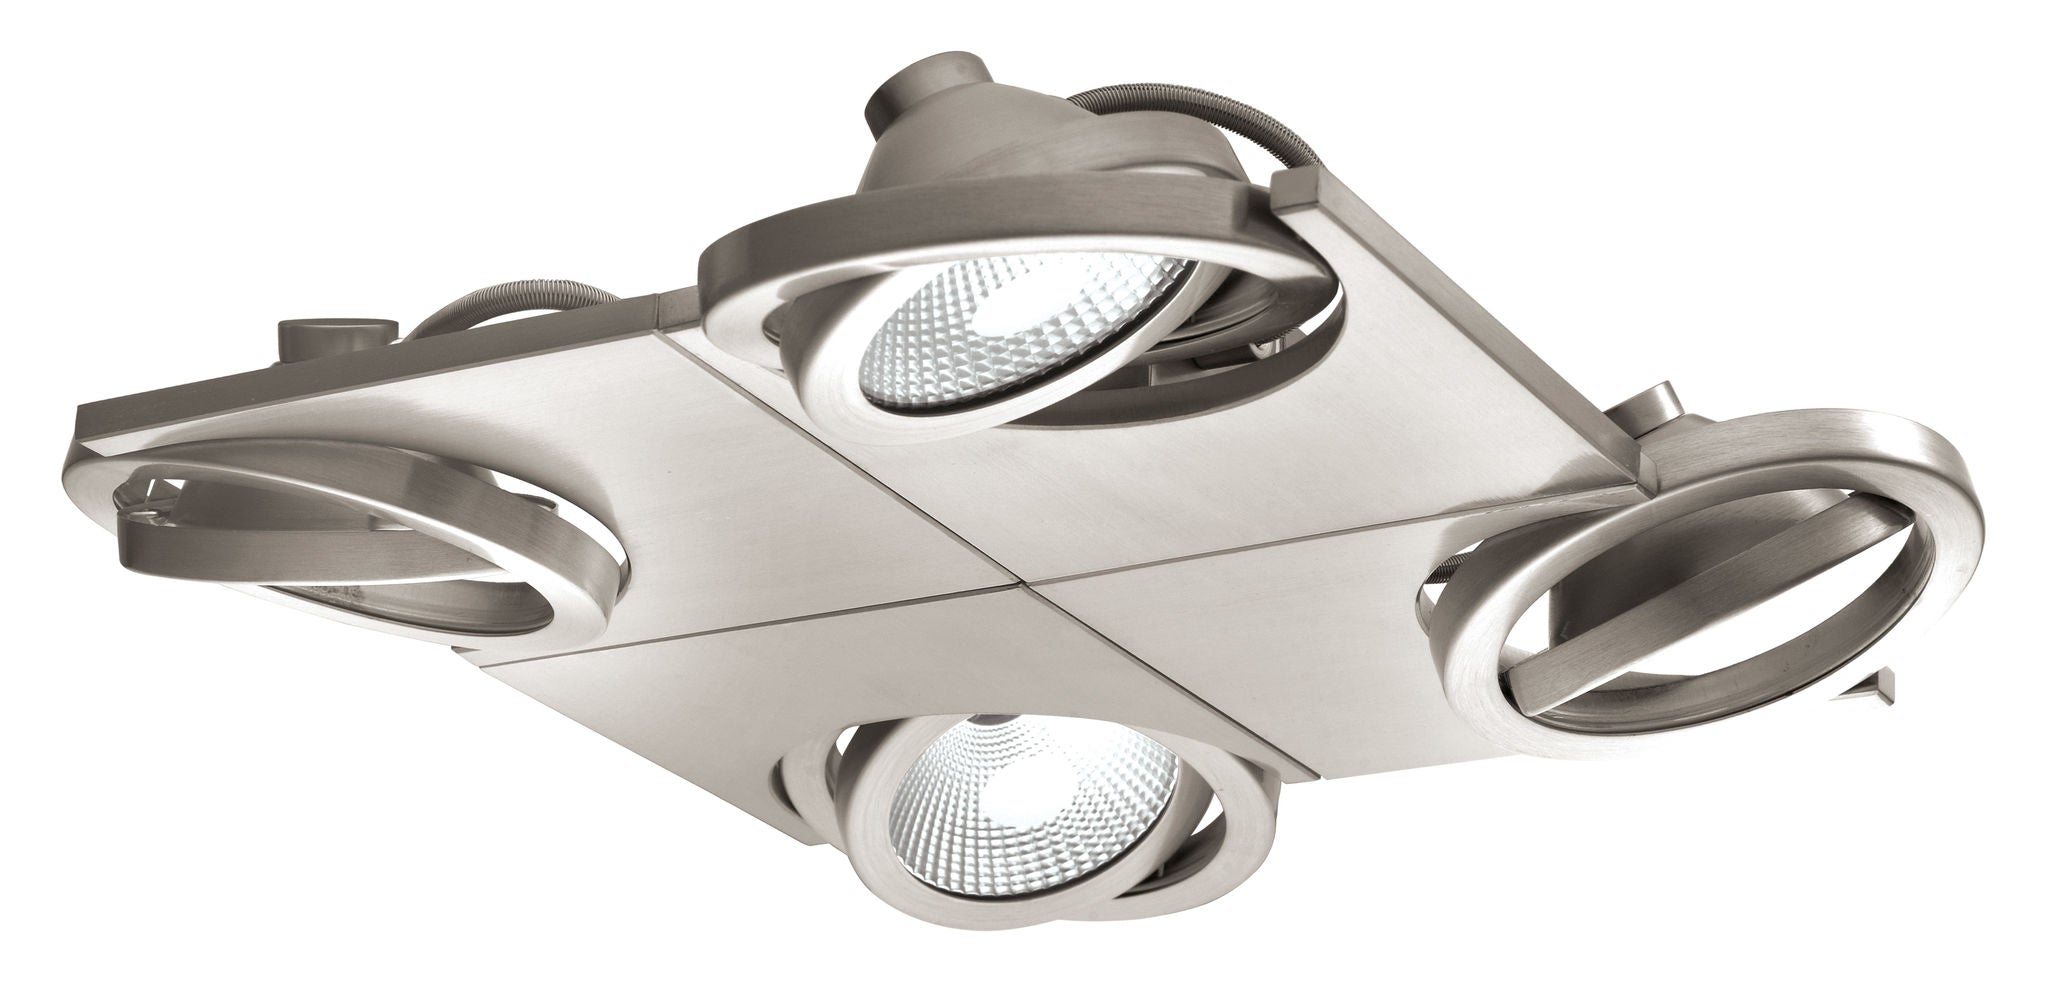 Brea Spotlight Stainless steel INTEGRATED LED - 39251A | EGLO